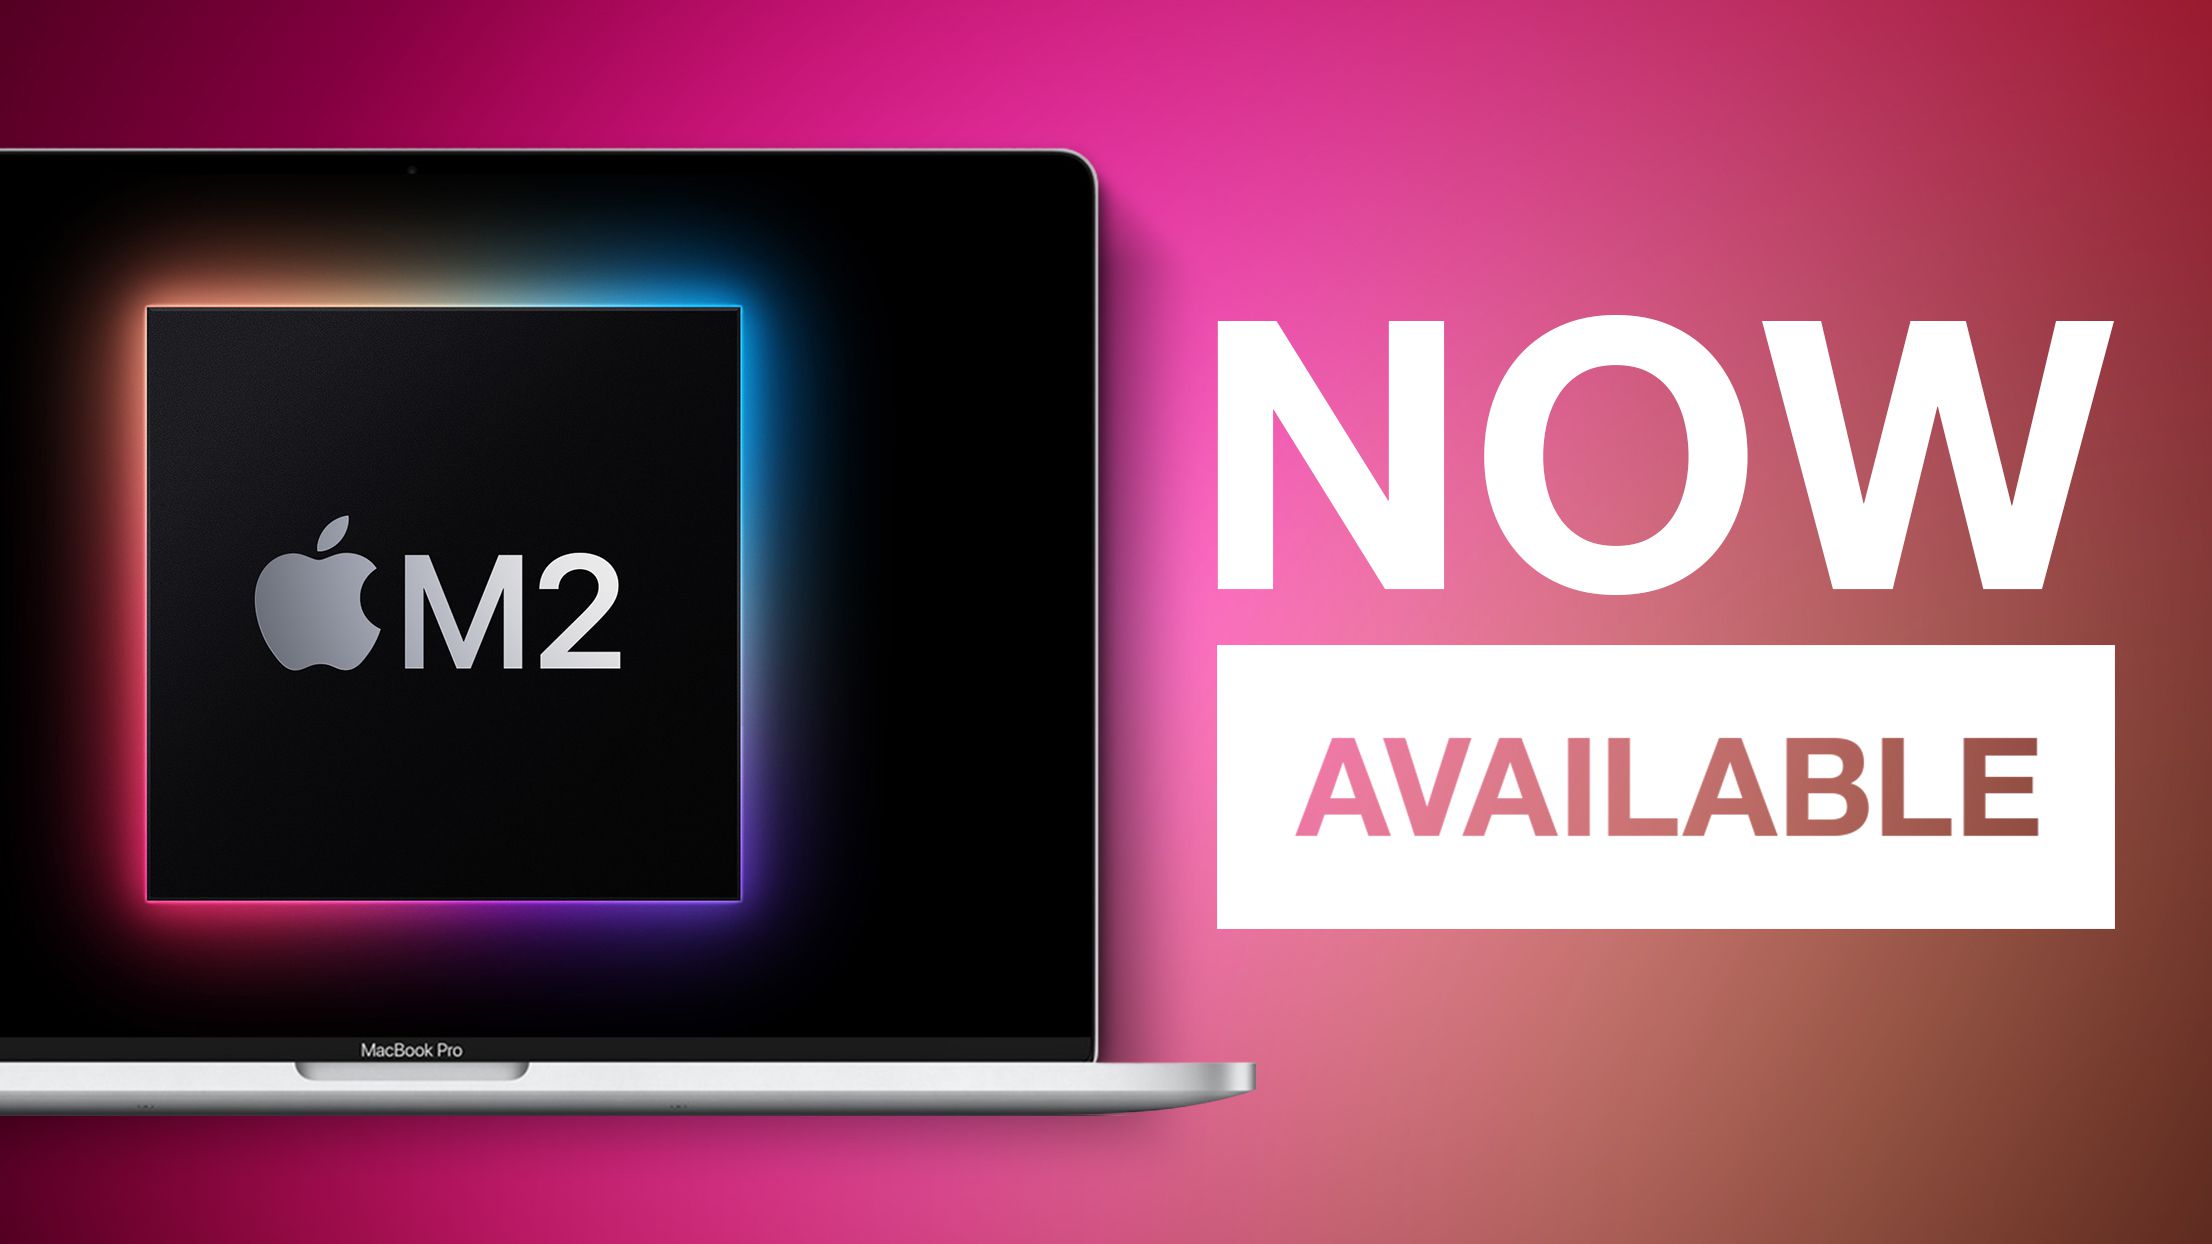 13-Inch MacBook Pro With M2 Chip Now Available to Order - macrumors.com